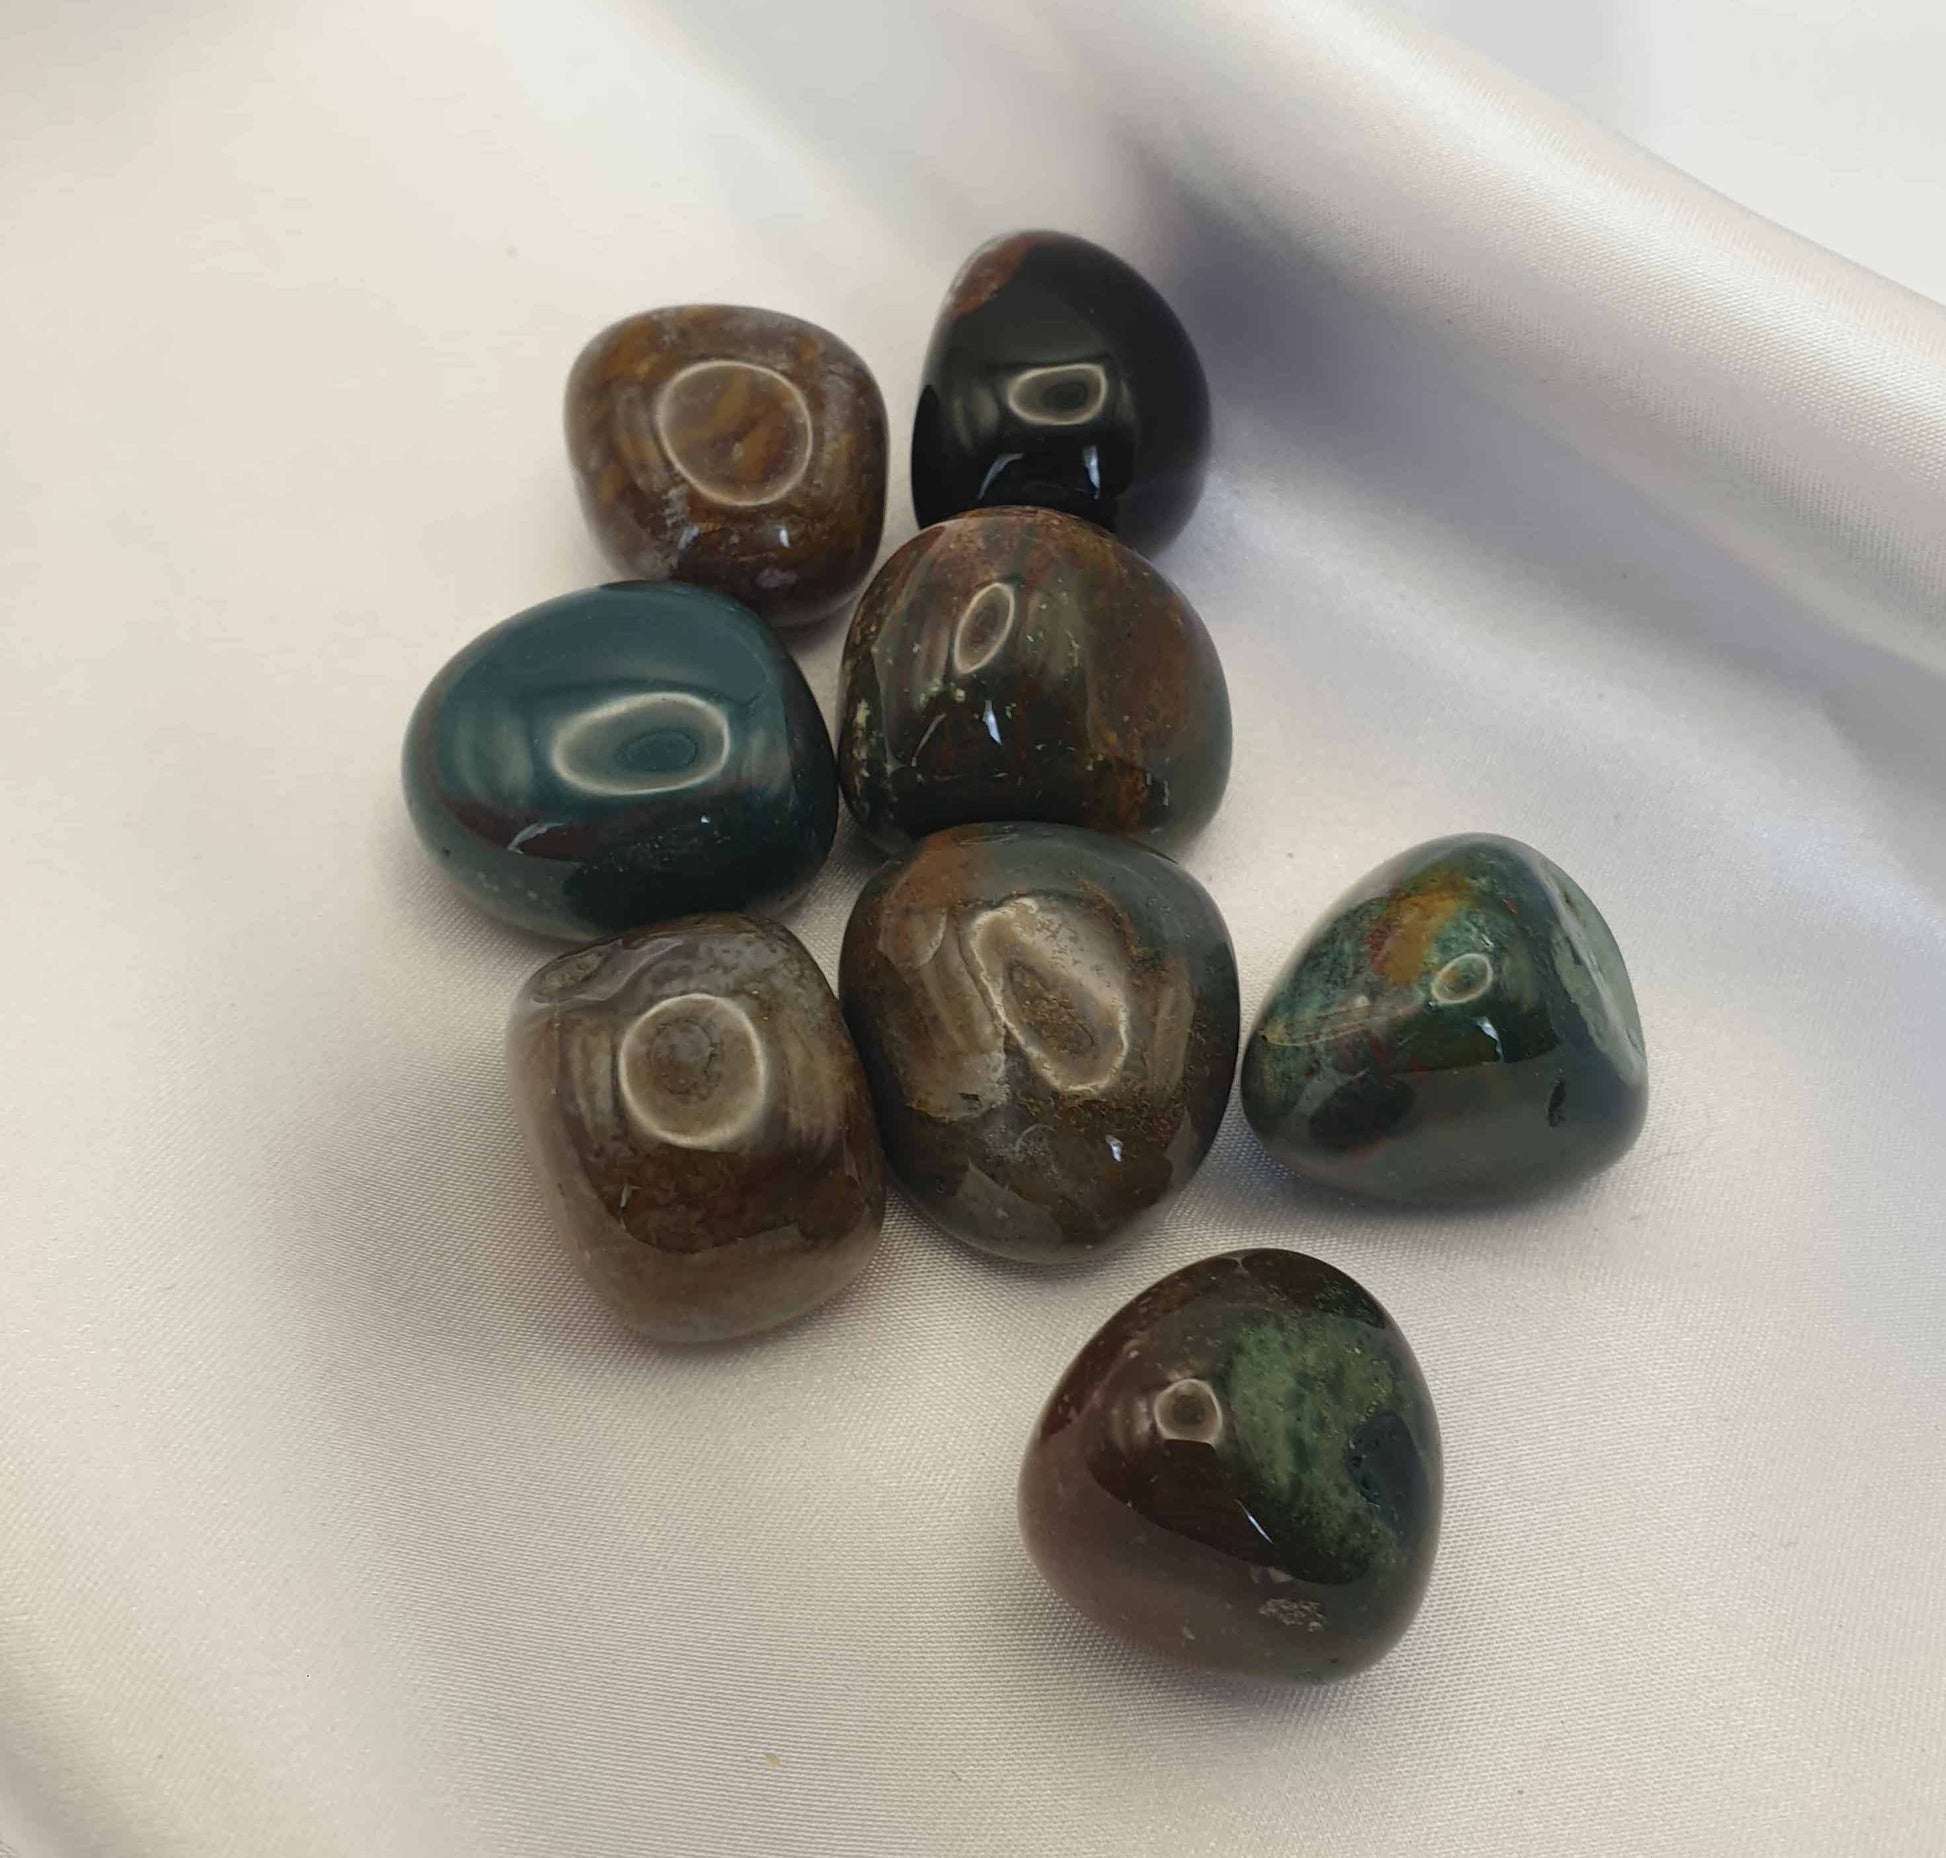 A grounding stone said to help bring emotional, physical and intellectual balance. Fancy Agate can bring protection, prosperity and good luck, helping to encourage good judgement. This stones name comes the variety of colour patterns giving it a 'fancy' look.   Weight - 20 to 25 grams Size - 20 to 25mm  One stone will be intuitively chosen for you